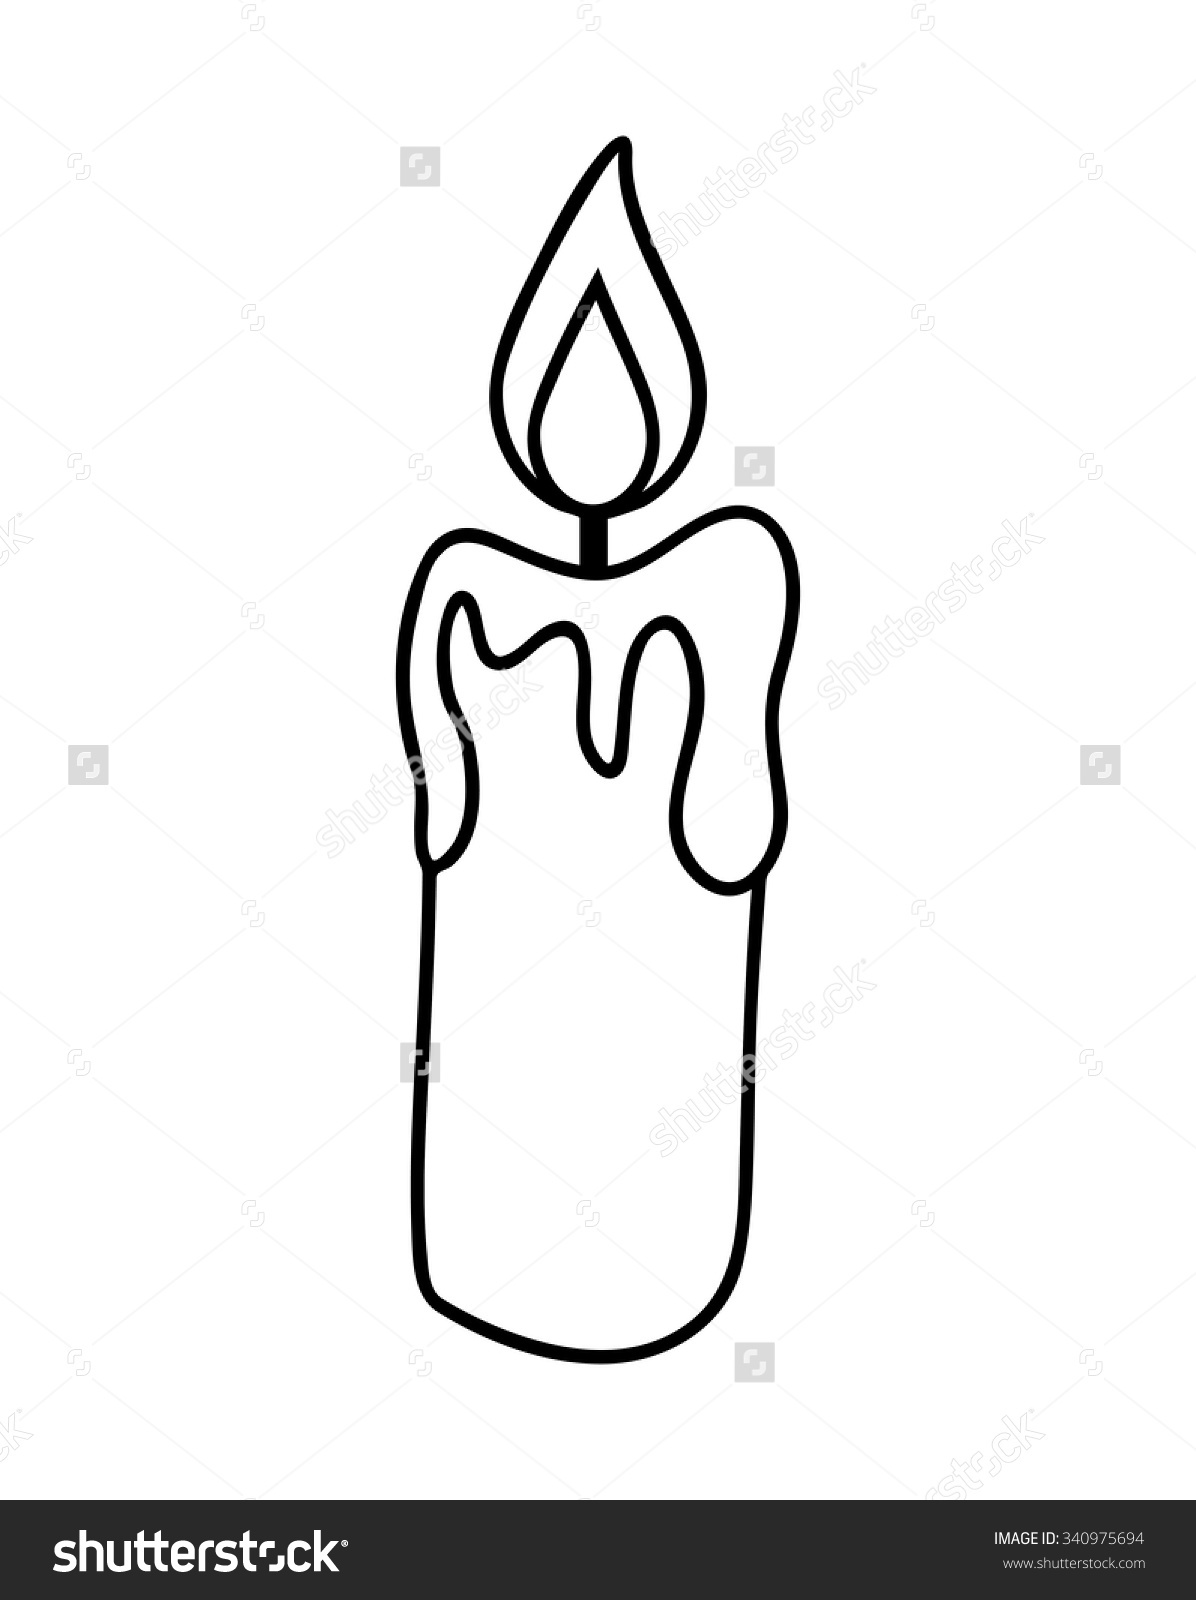 Clipart Black And White Candle.